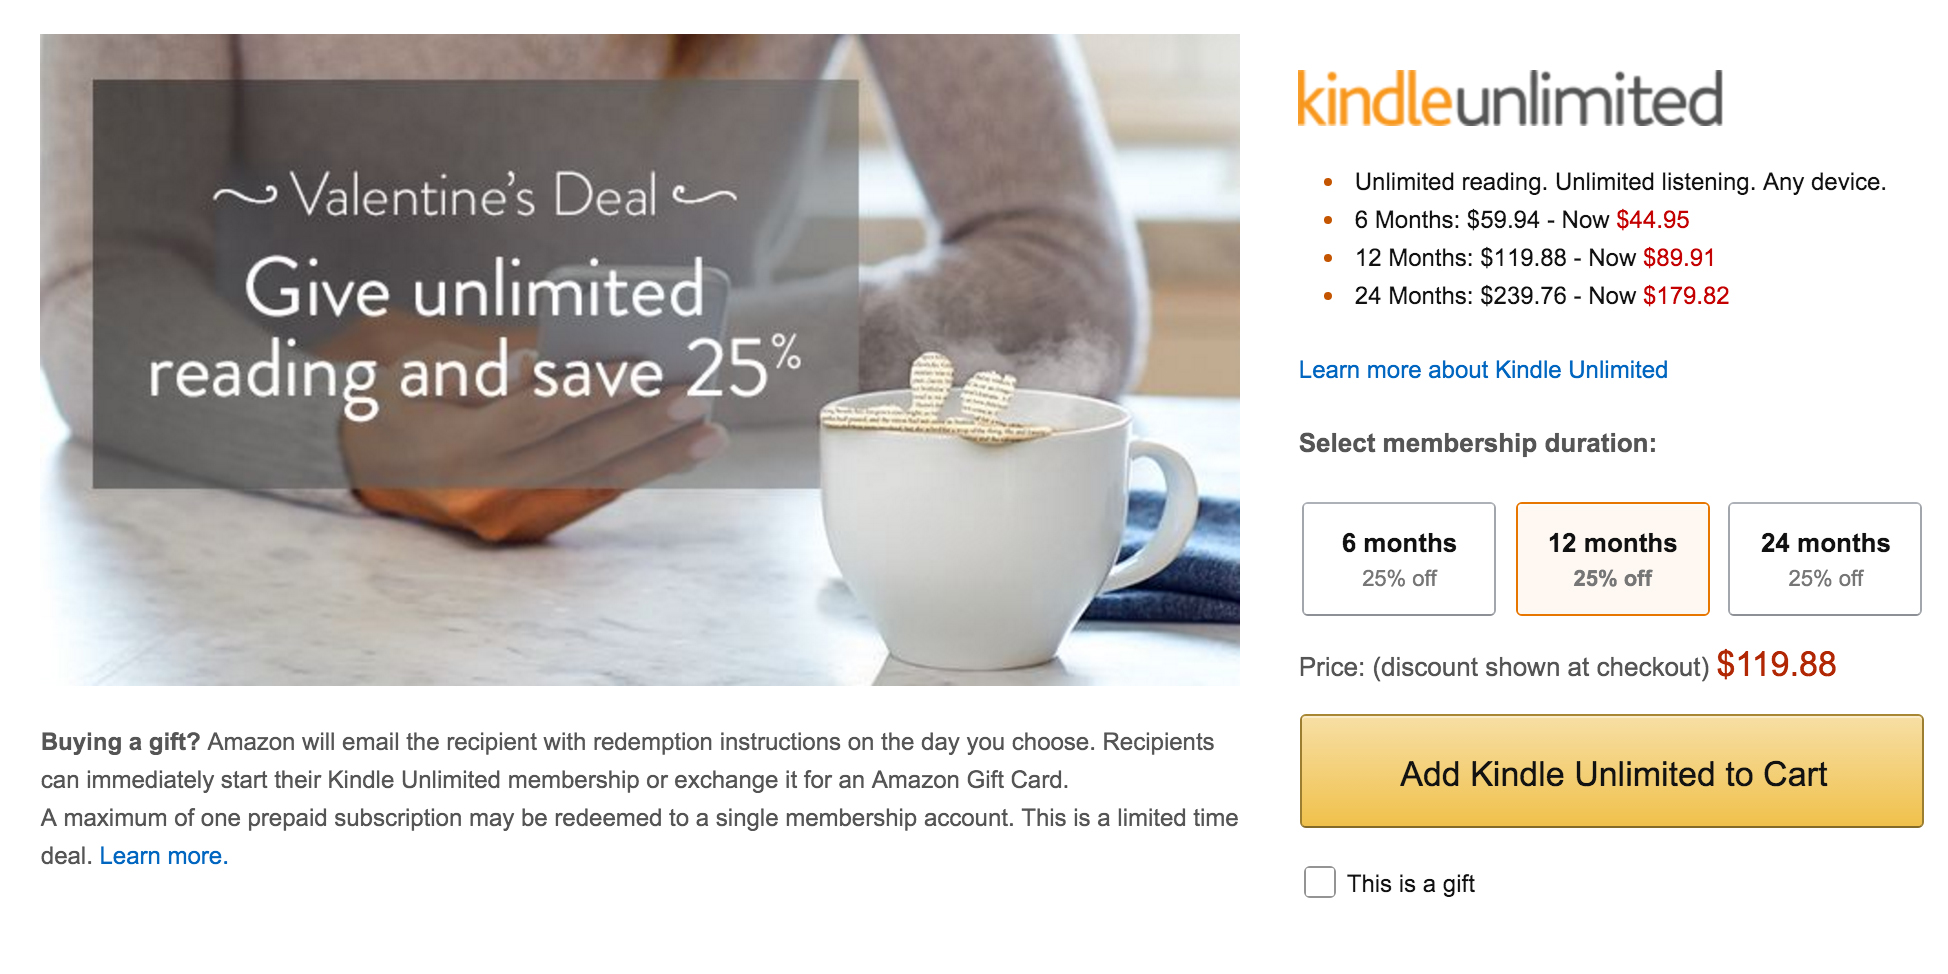 Amazon offers rare 25 discount on Kindle Unlimited subscriptions 6